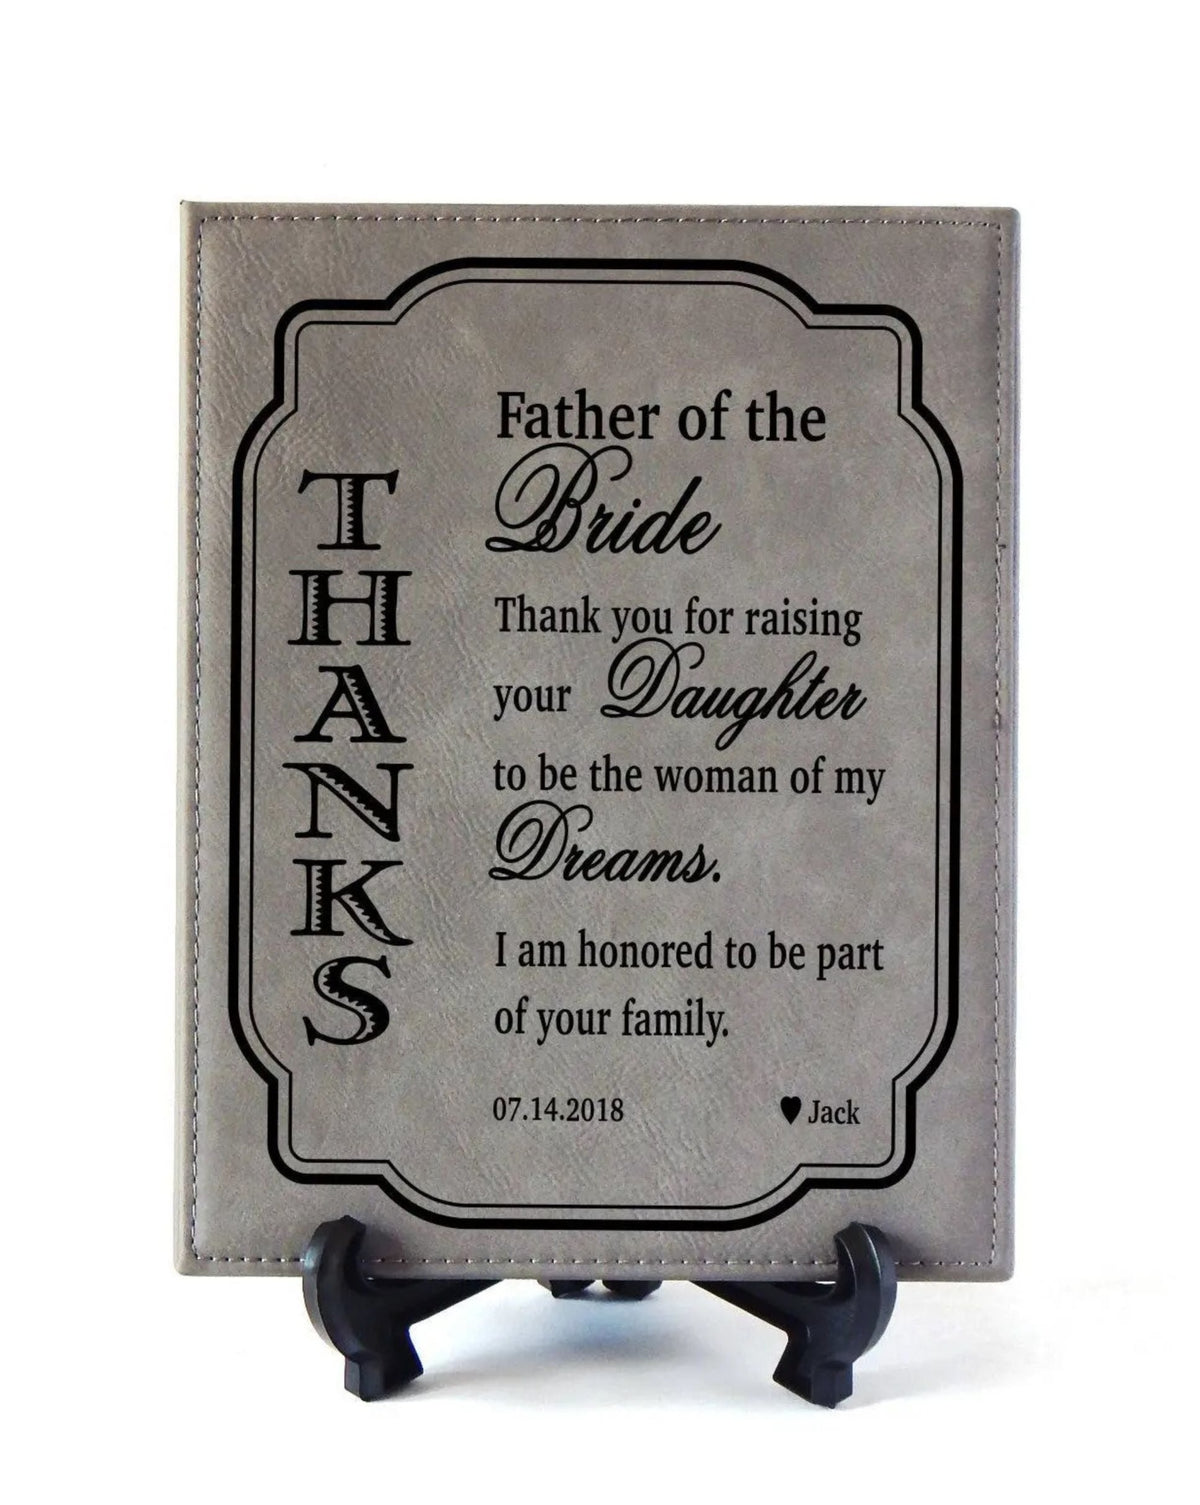 Father of the Bride Wedding Gift from Groom | Gifts for Mother In Law | Leather Plaque